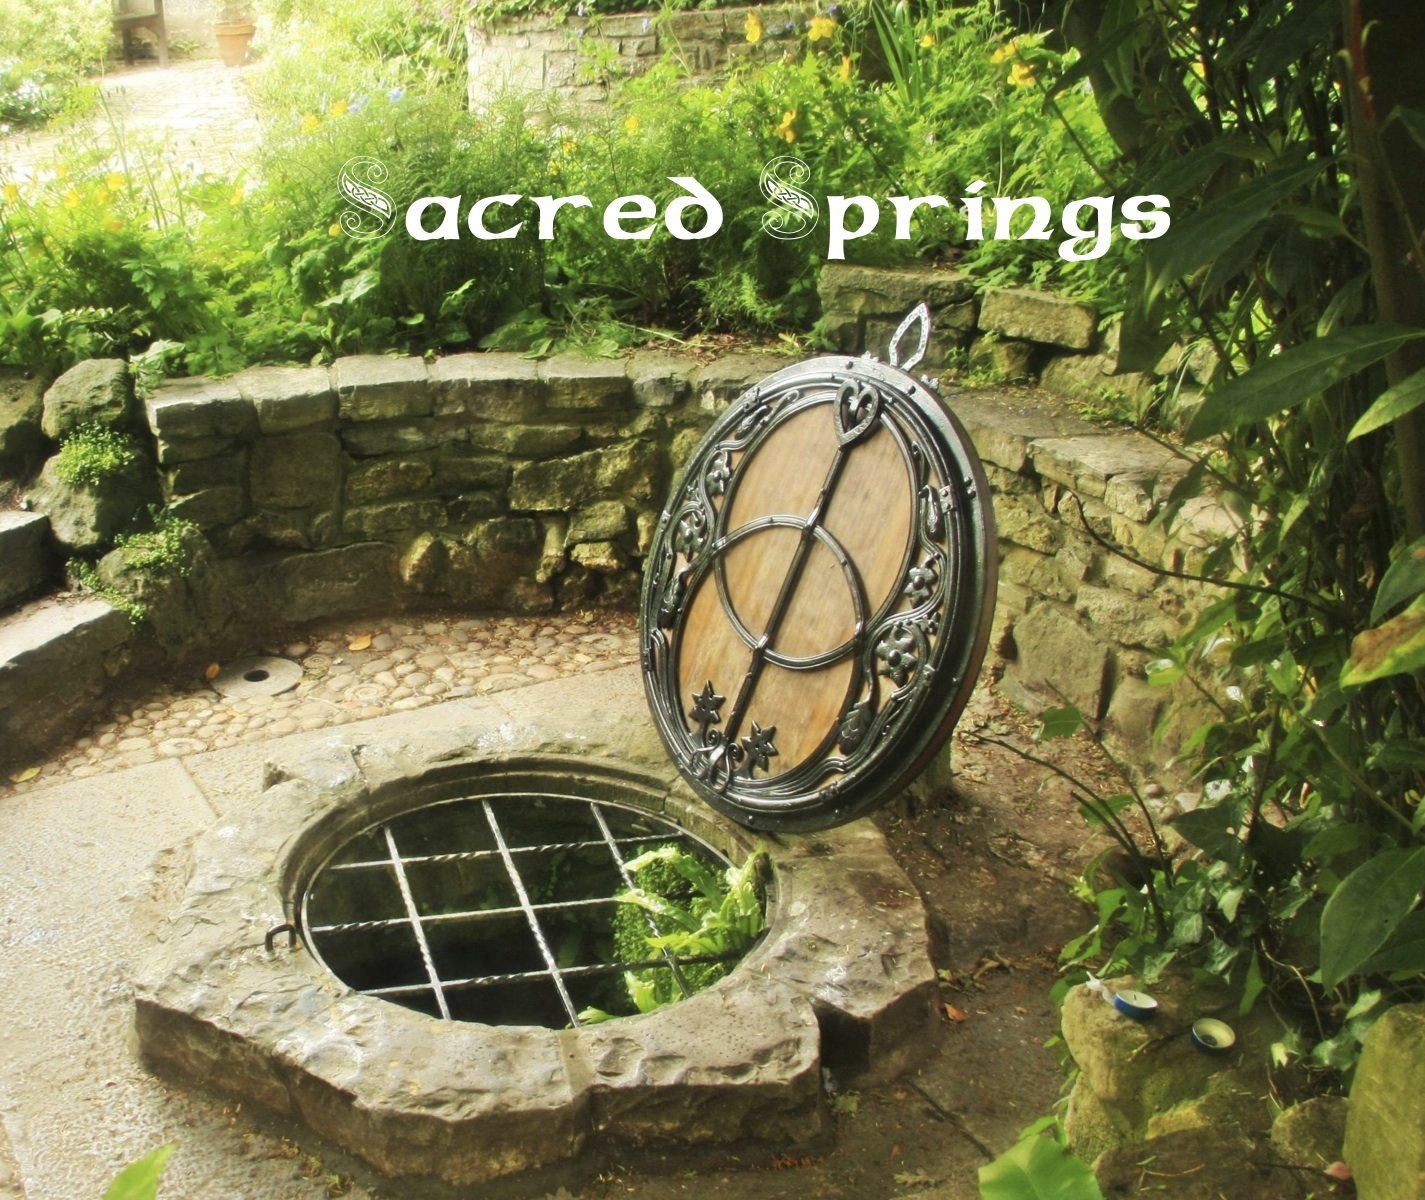 Magical Places Of Britain Book - Chalice Well - Viking Dragon Books